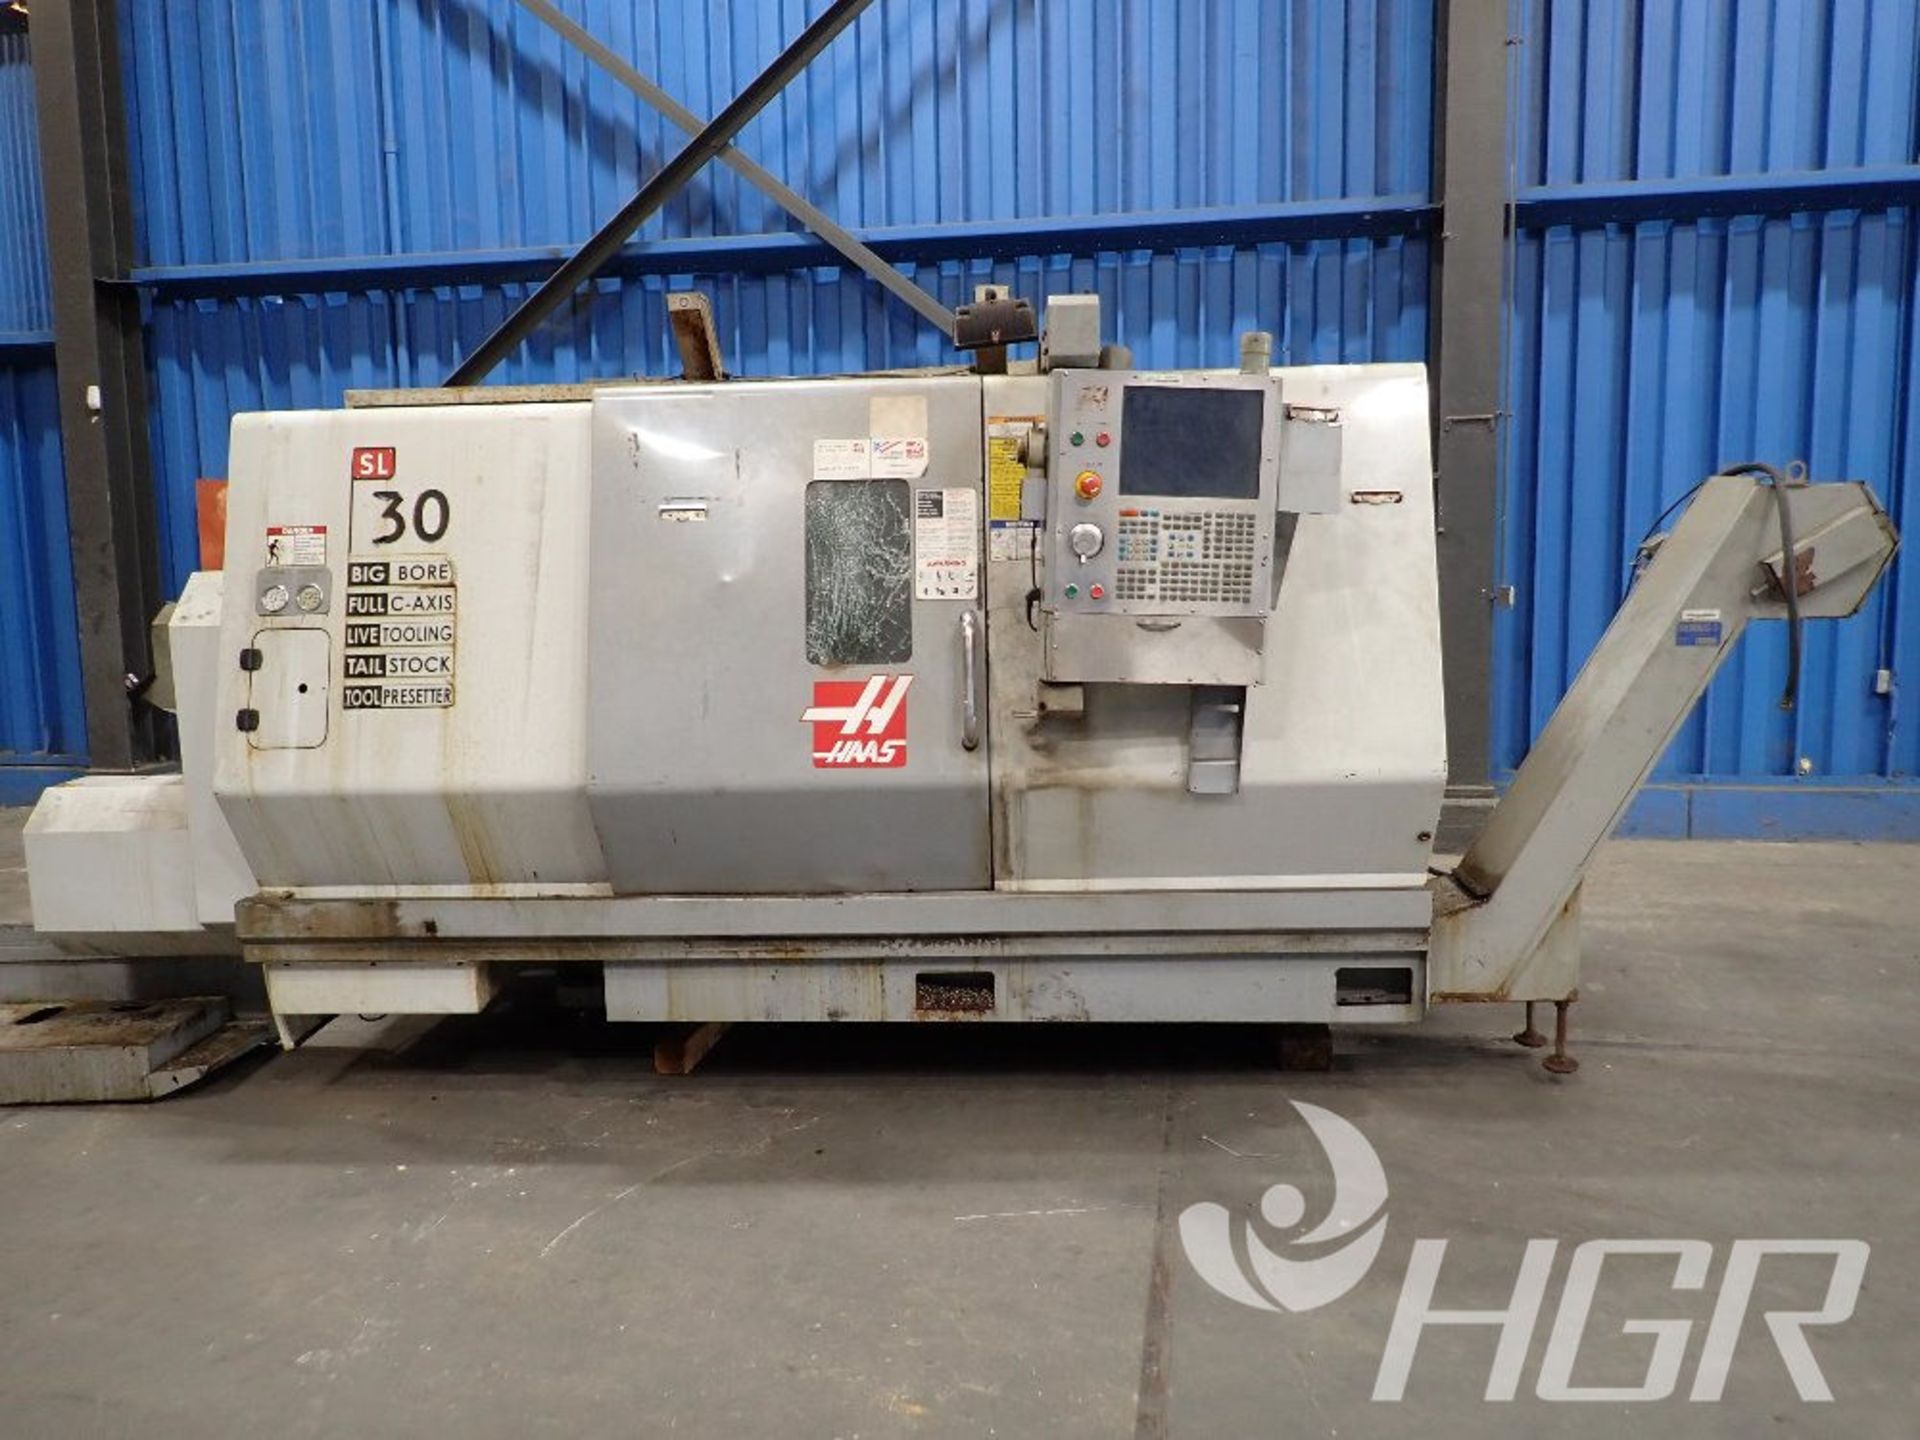 HAAS CNC LATHE, Model SL-30TB, Date: 2006; s/n 3074485, Approx. Capacity: n/a, Power: 3/50/60/208/ - Image 3 of 33